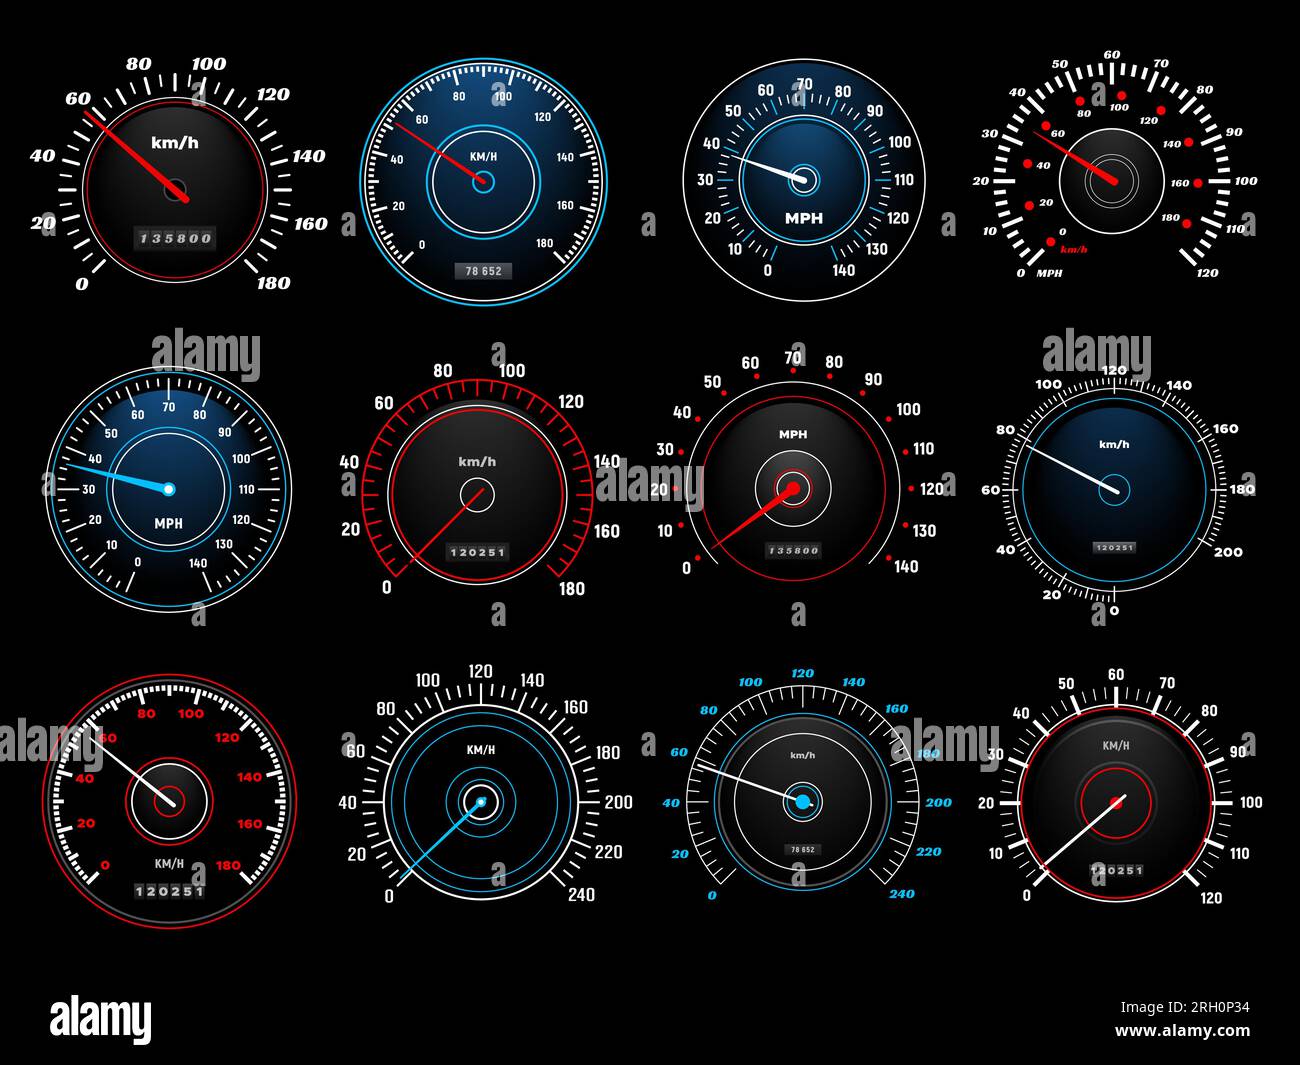 https://c8.alamy.com/comp/2RH0P34/speedometers-speed-indicator-vector-dashboard-dial-scales-for-auto-vehicle-board-realistic-interface-isolated-car-speedometers-with-km-digits-and-a-2RH0P34.jpg